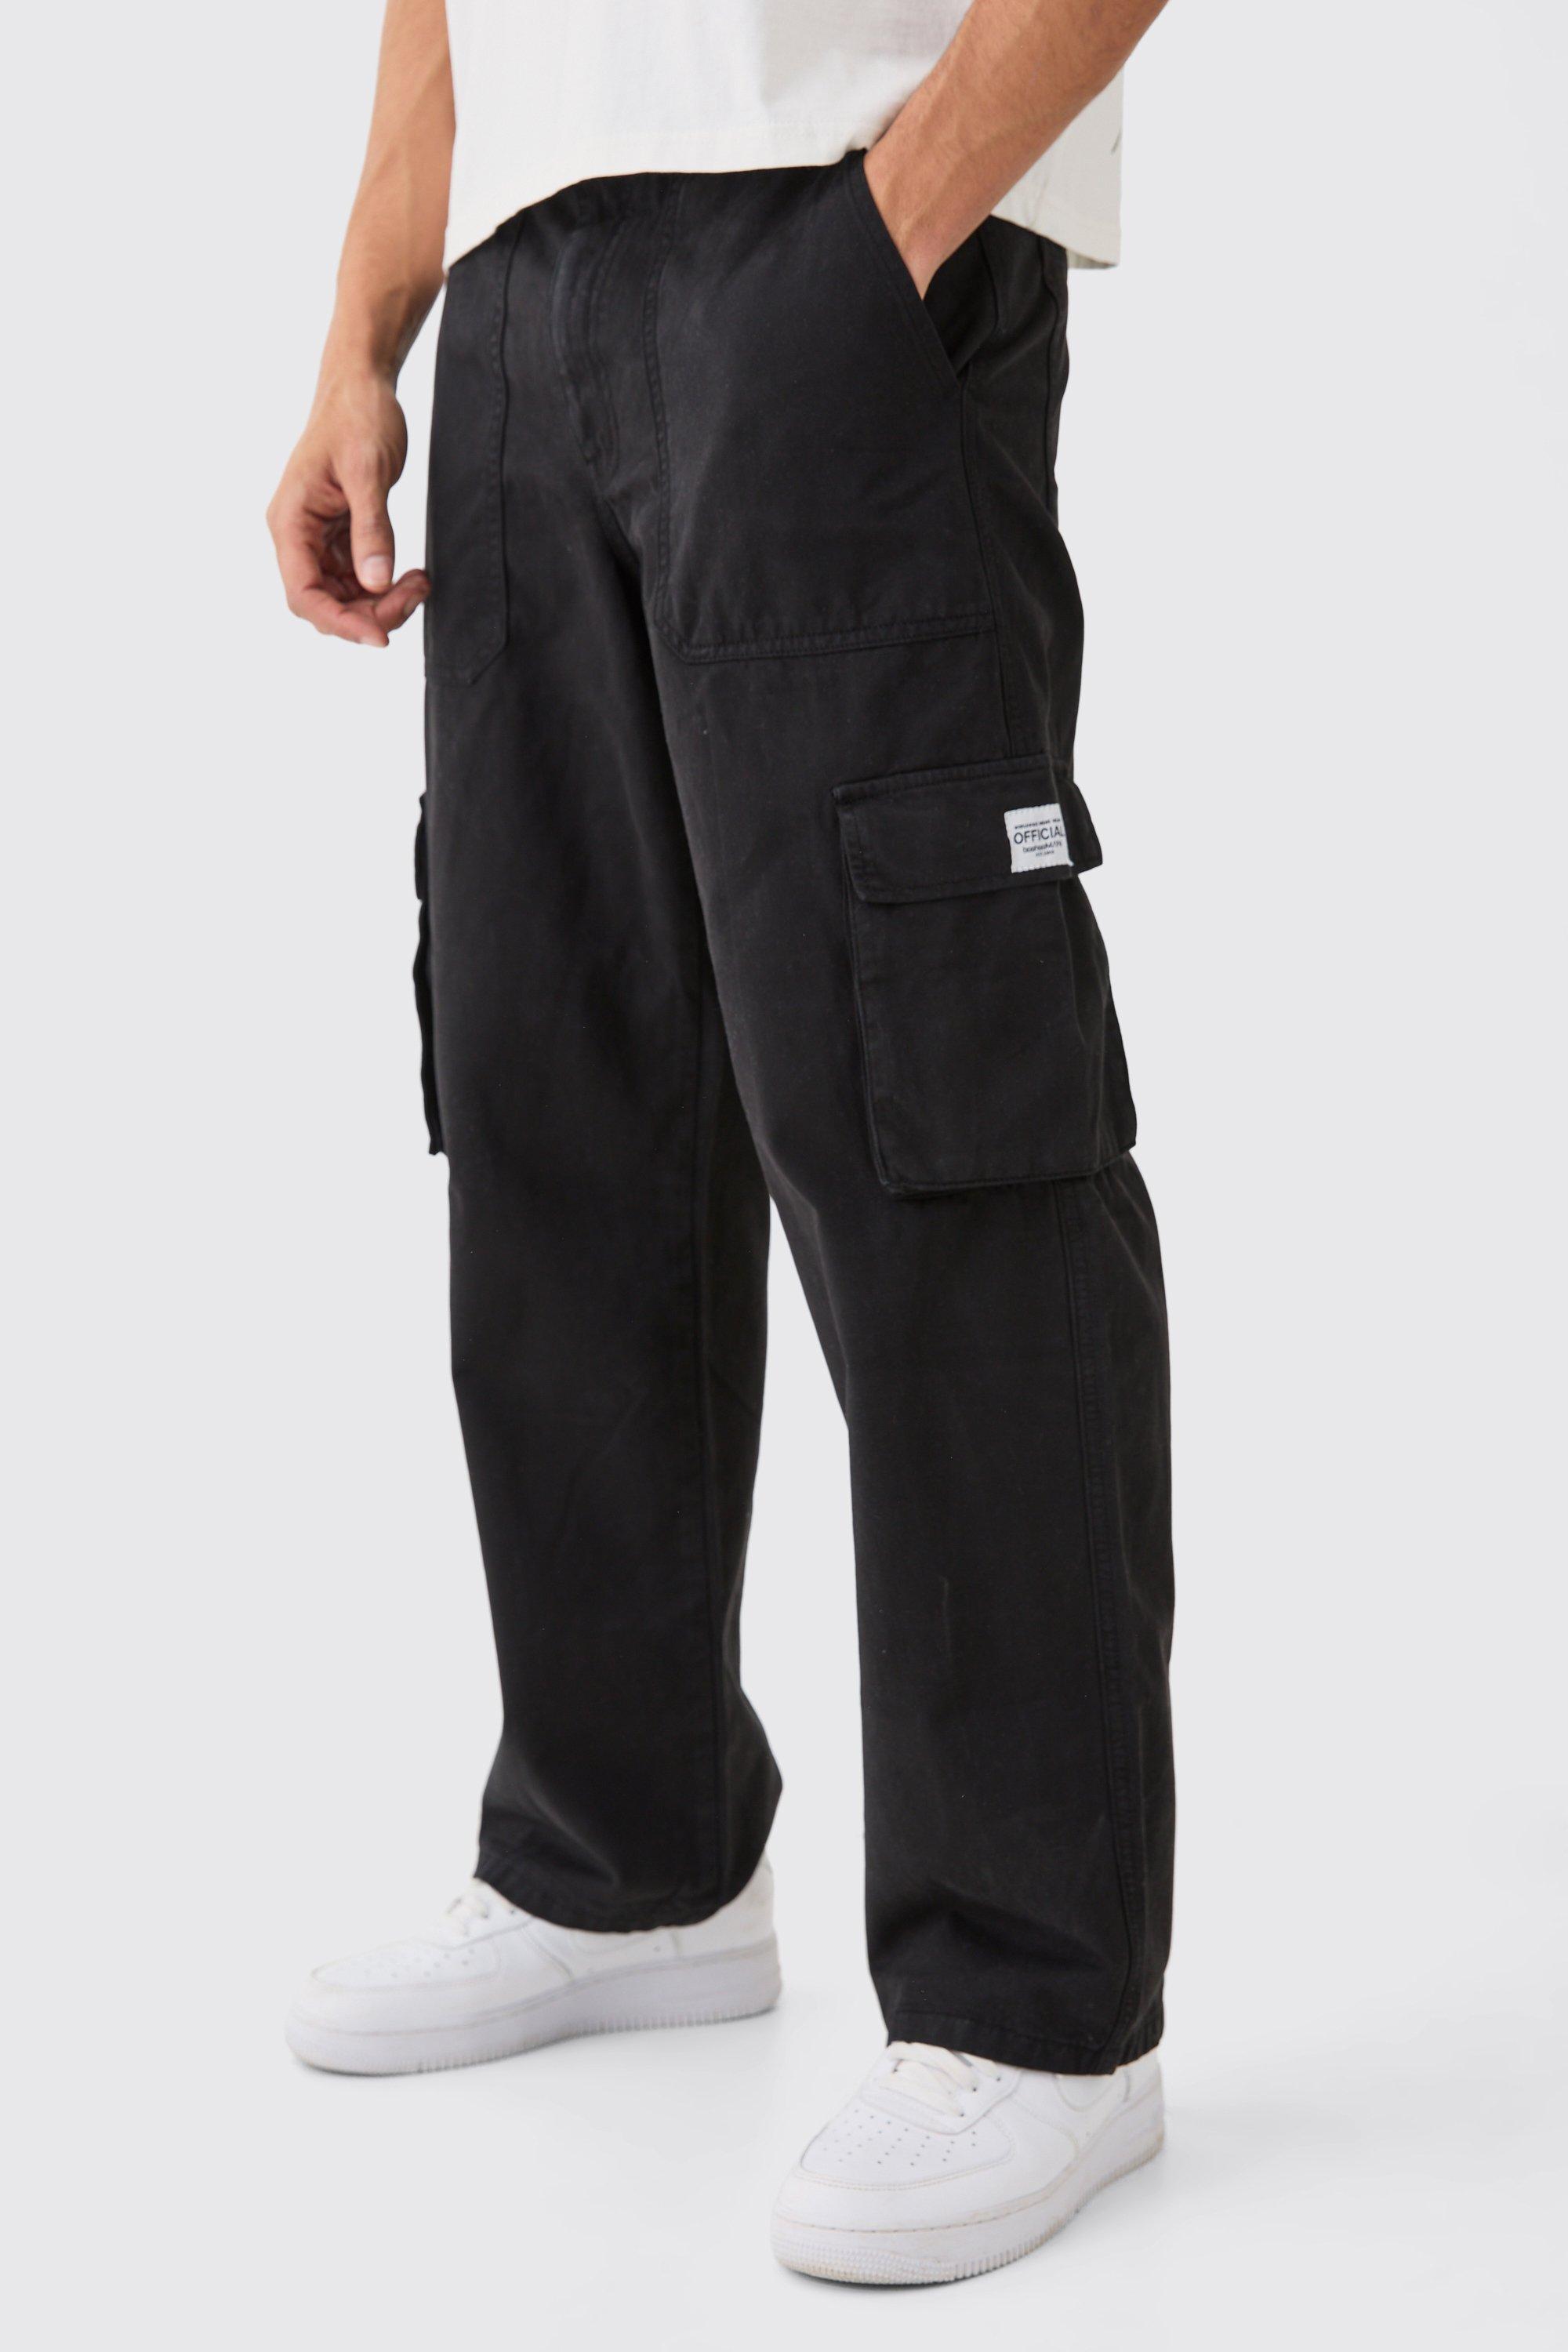 Qopobobo Joggers for Men Cargo Pants for Men Relaxed Palestine